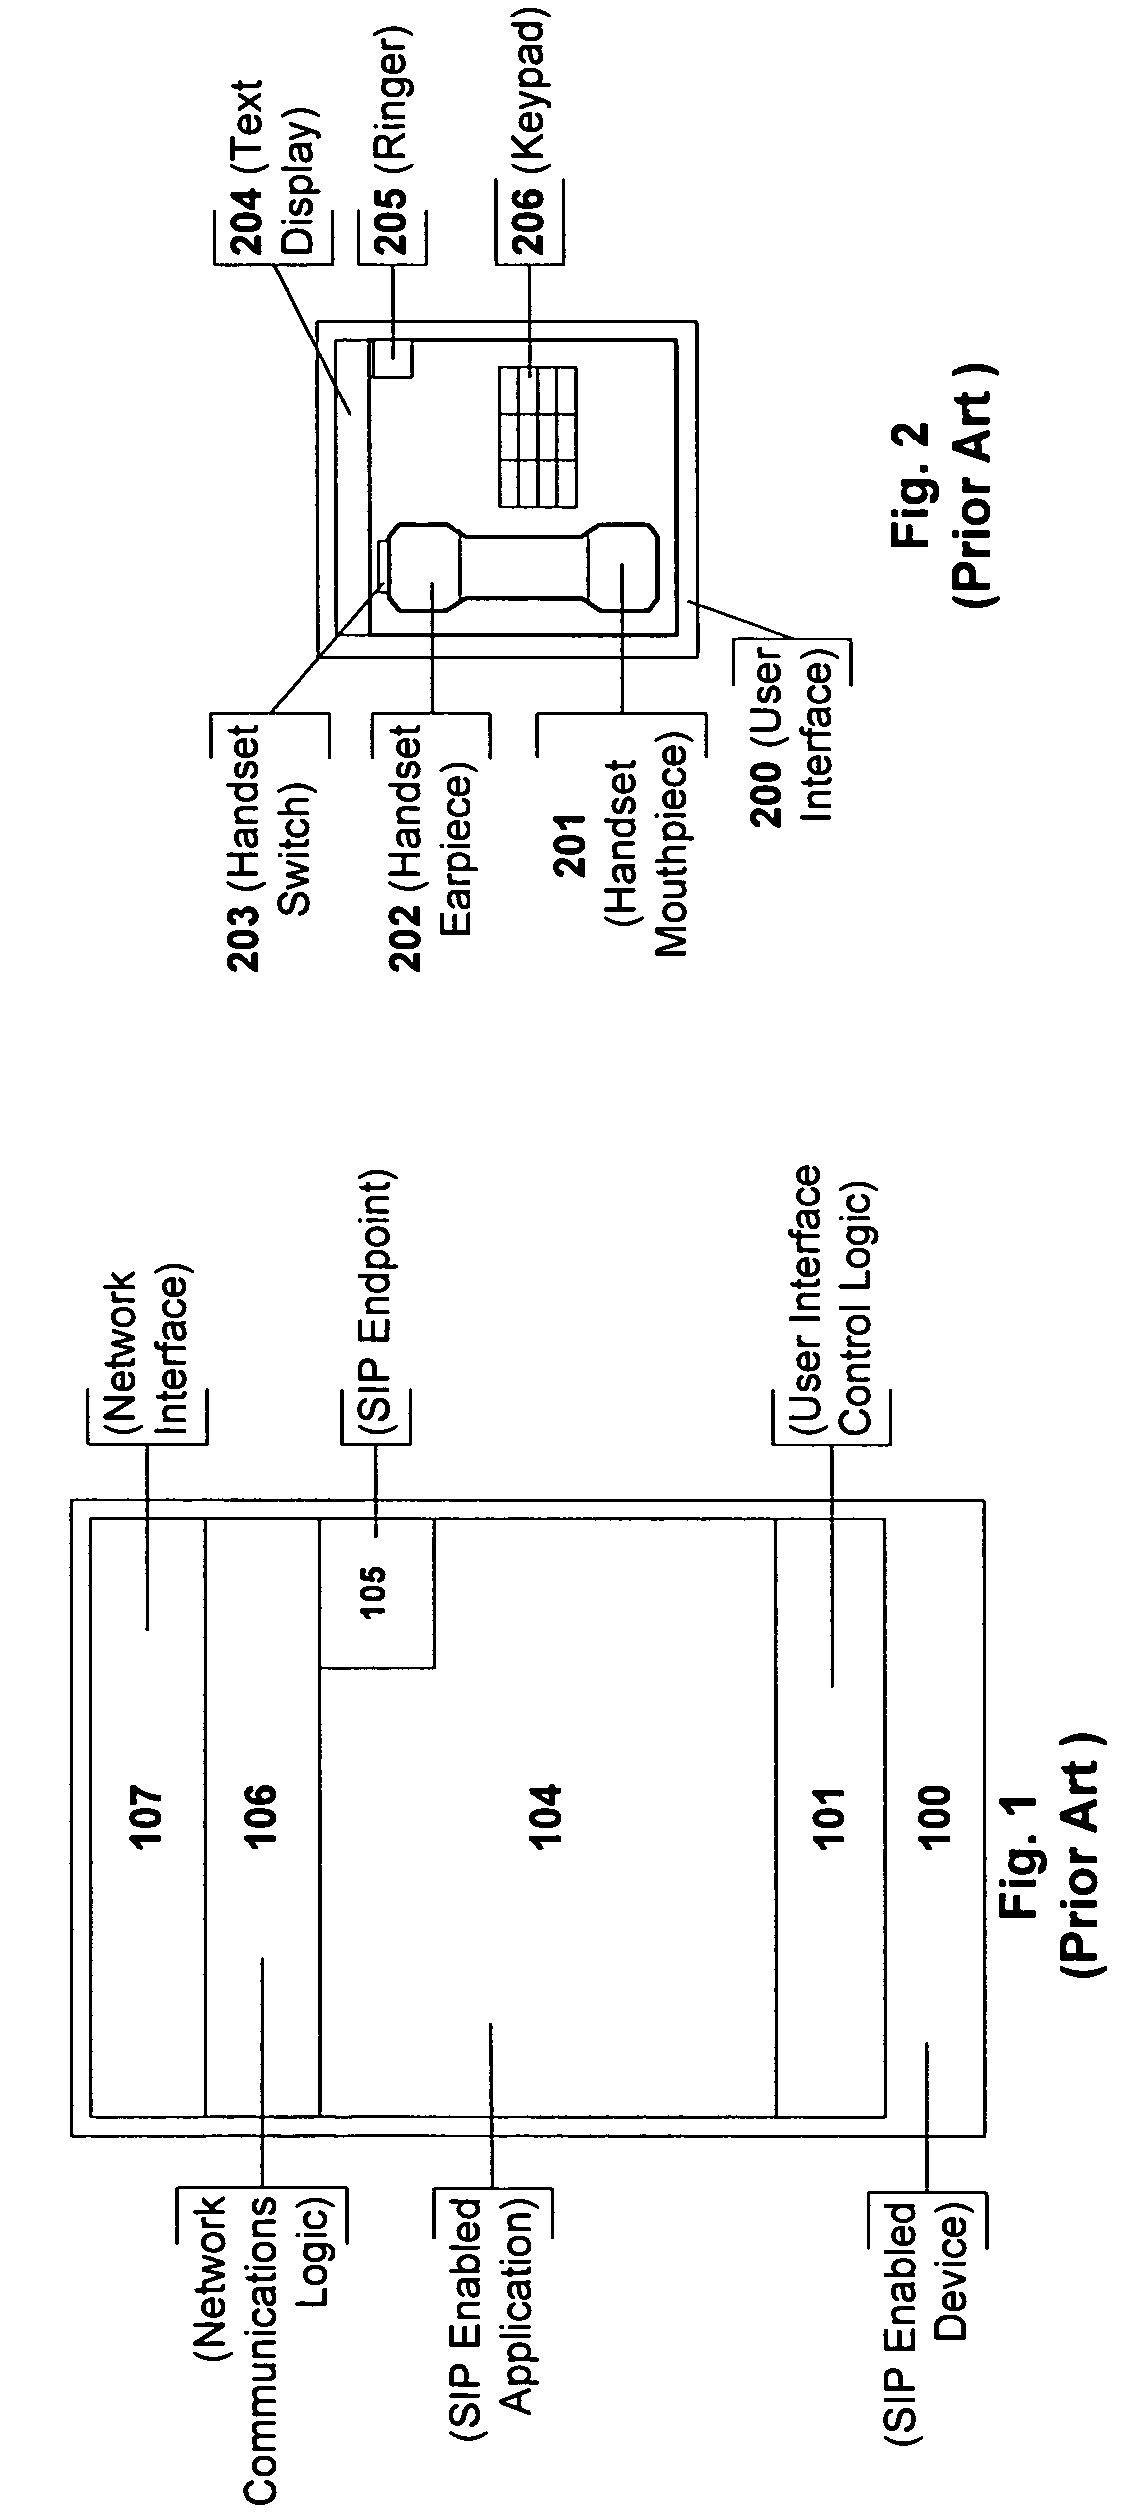 Flexible session initiation protocol endpoint signaling